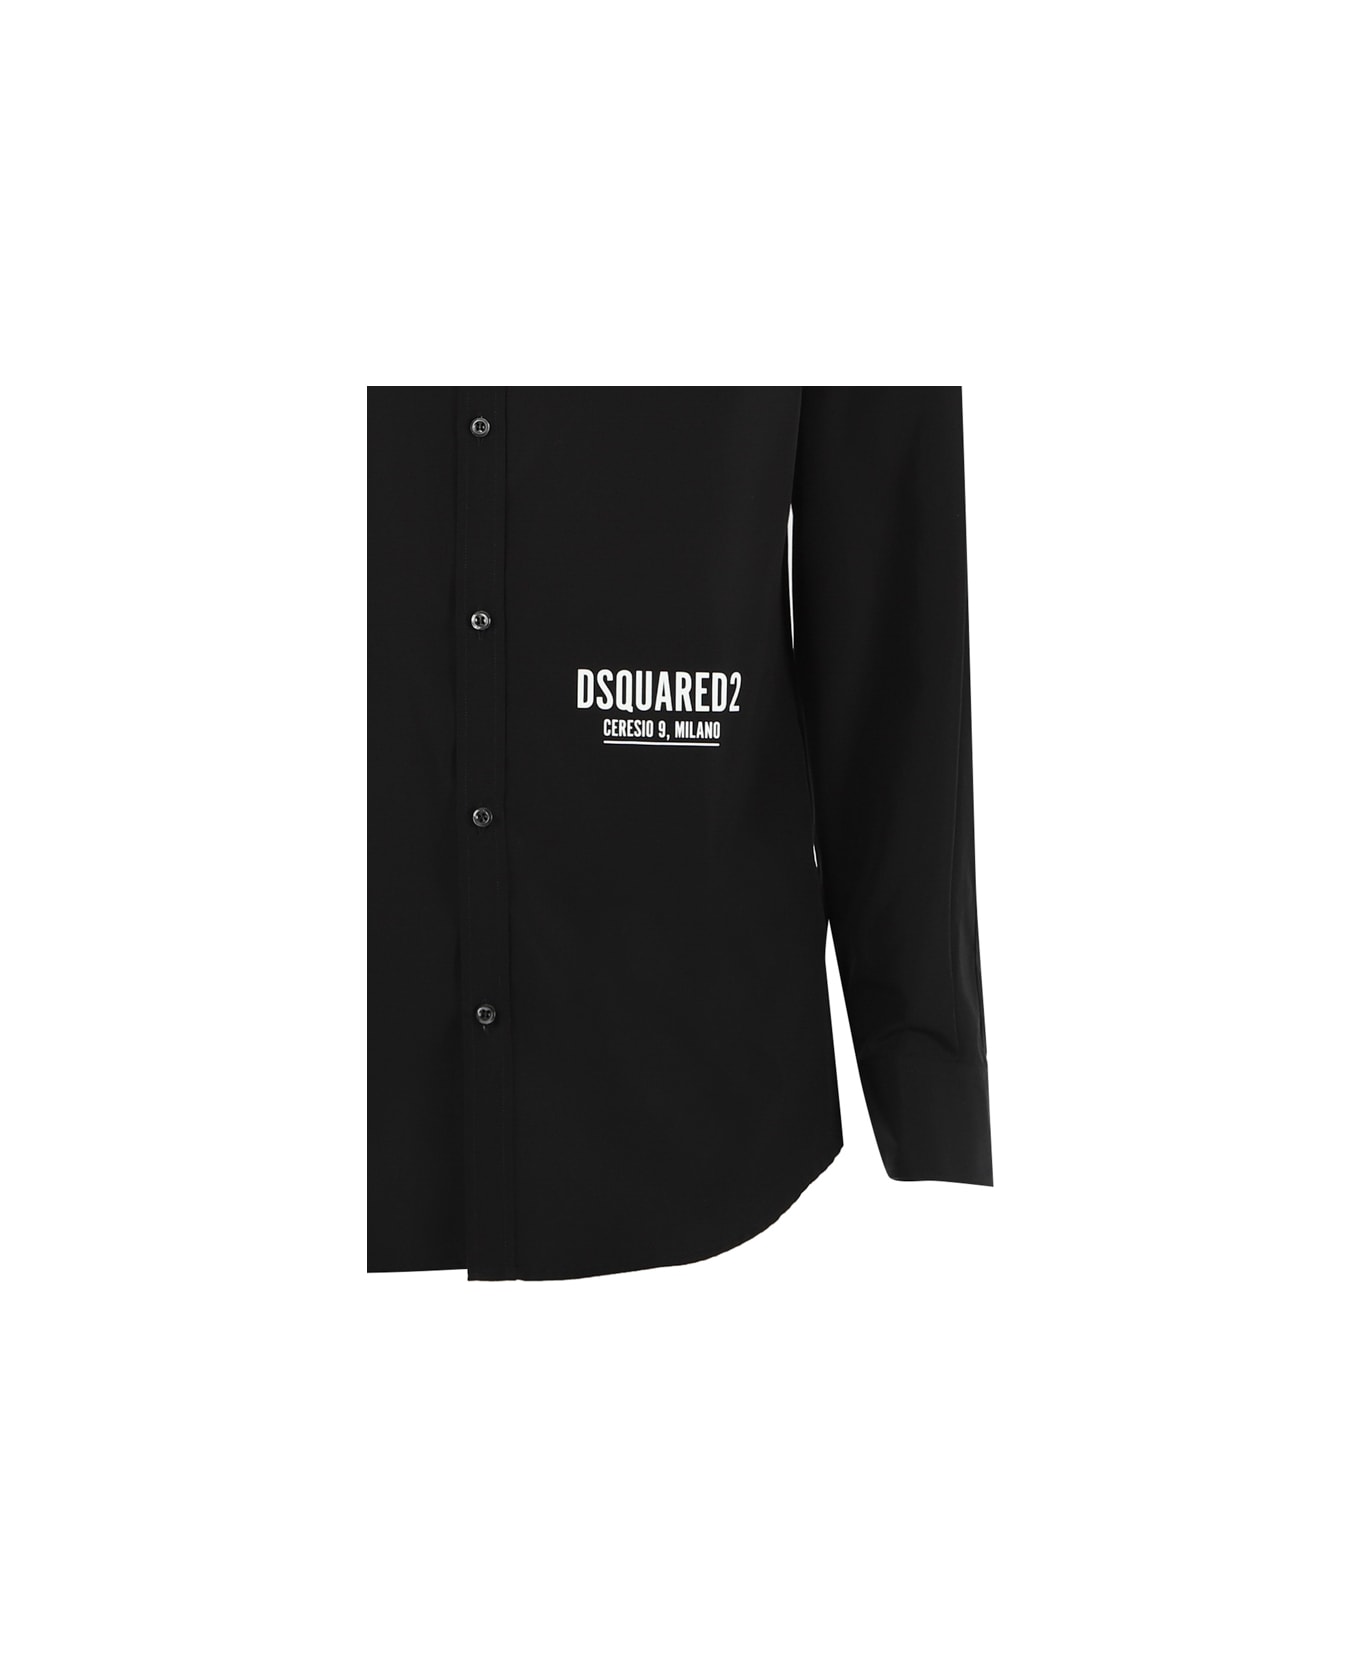 Dsquared2 Cotton Shirt With Contrasting Color Logo - Black